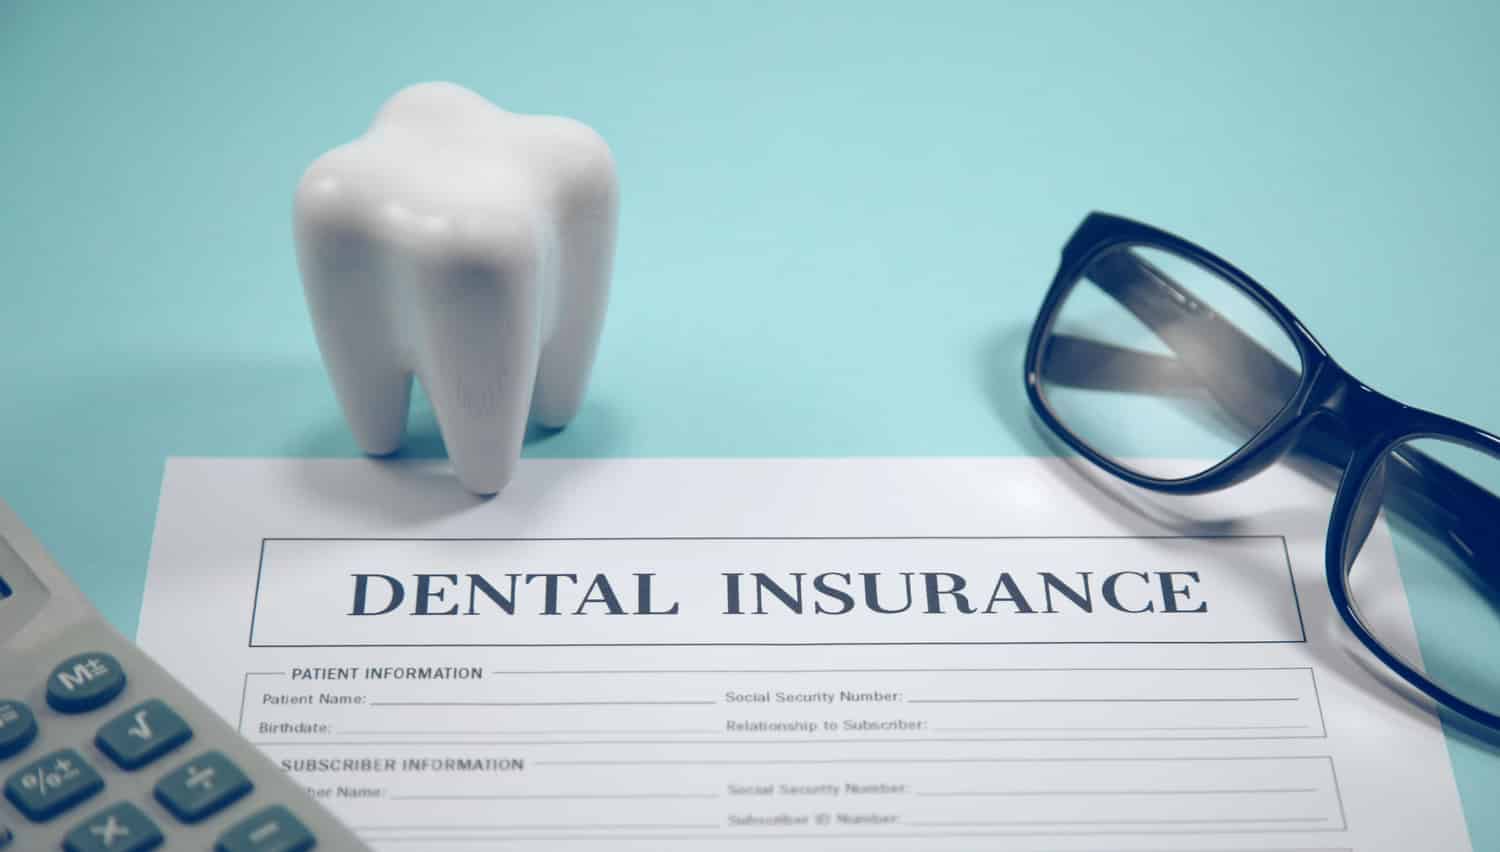 Using Your Group - HEALTH Dental Insurance At The Dentist